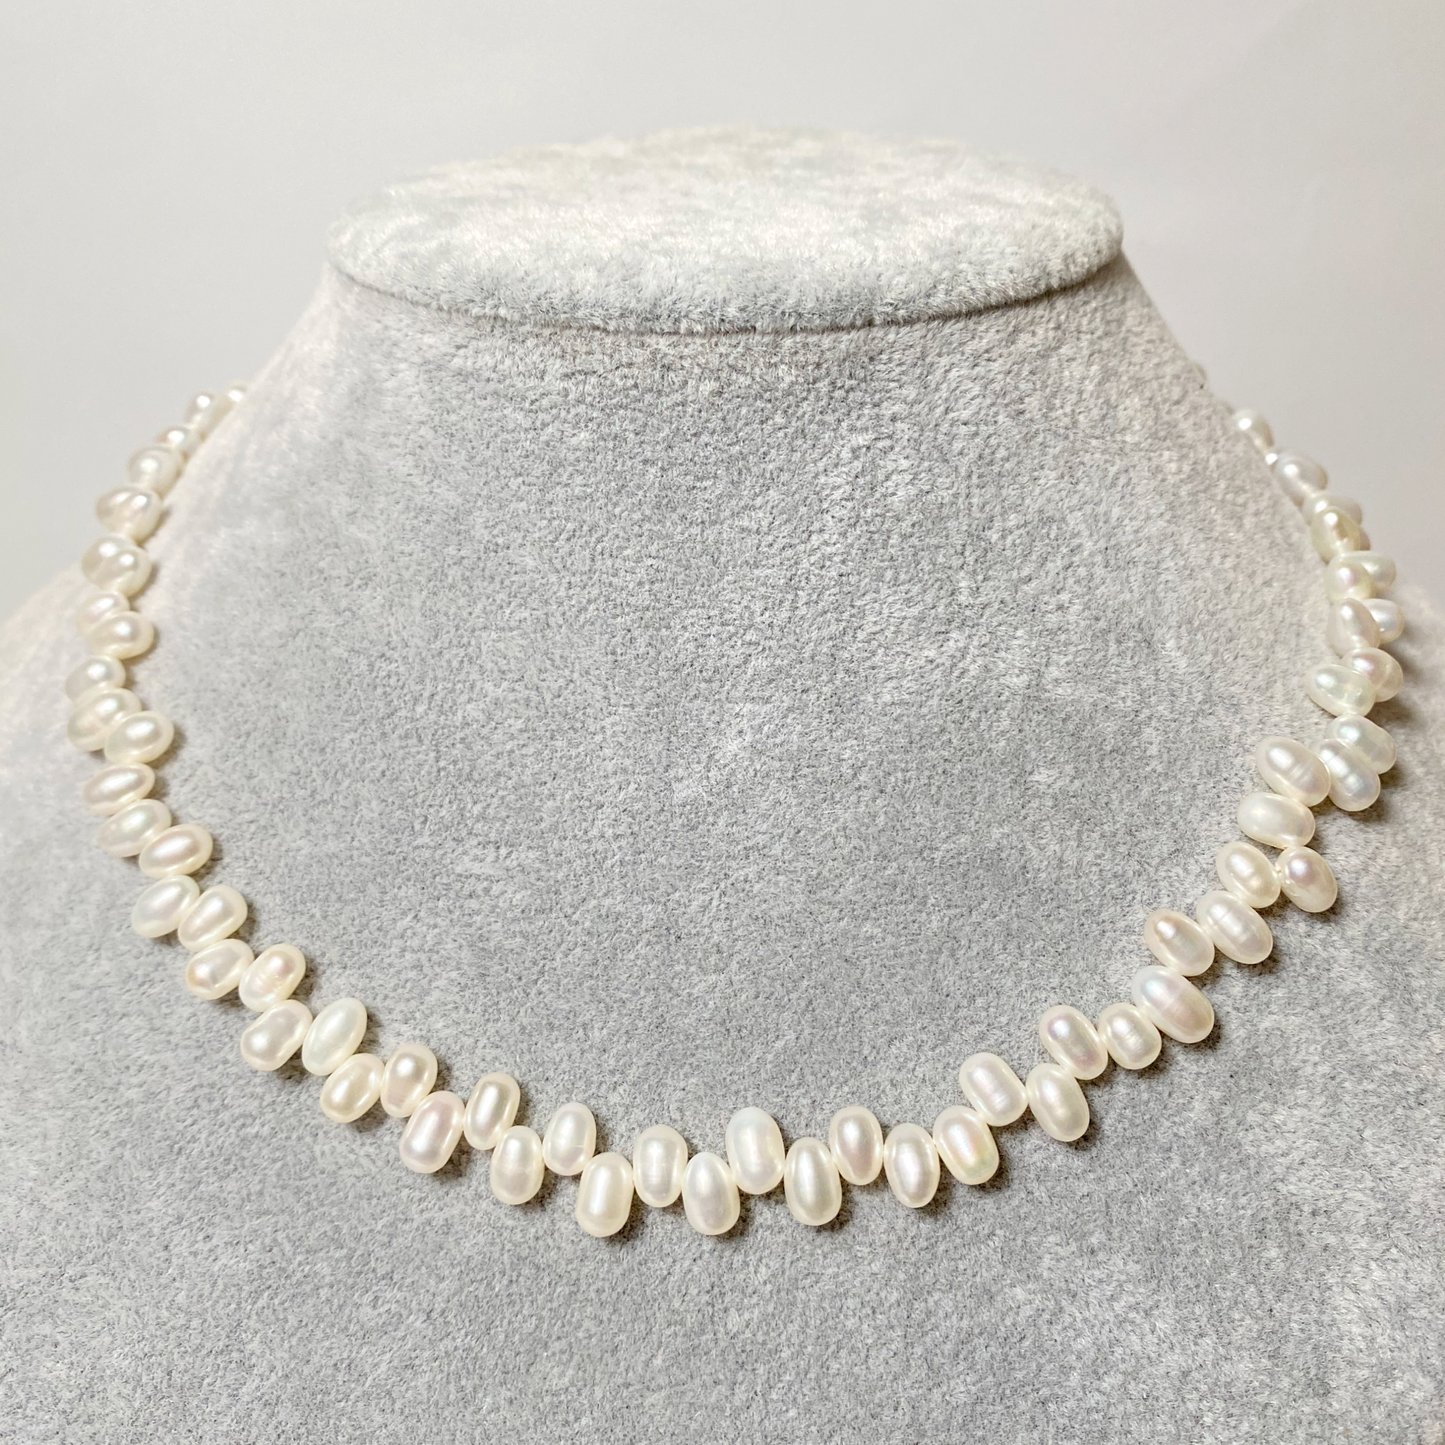 Vintage Rice Shape Baroque Pearl Choker Necklace